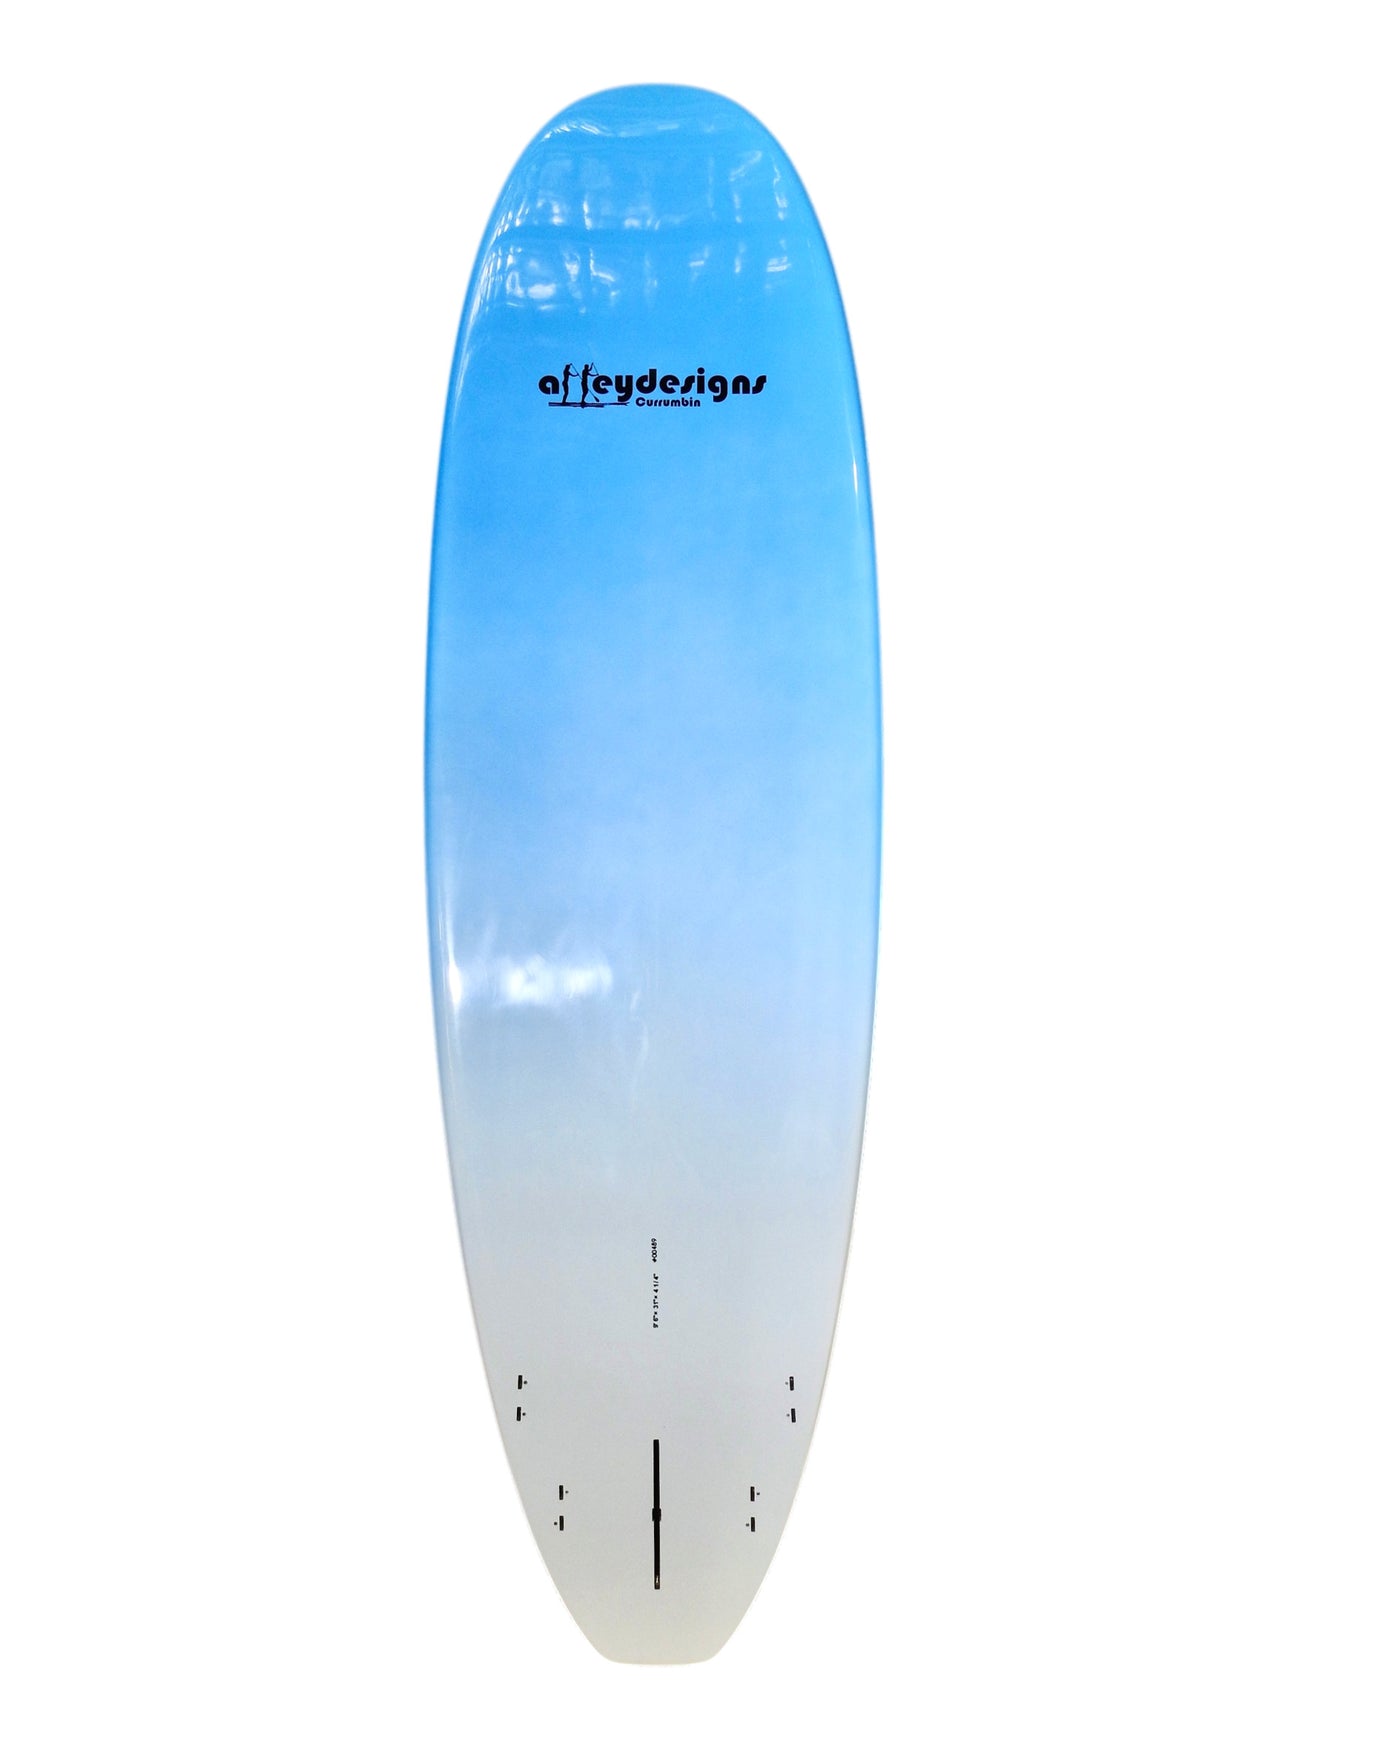 9'6" x 31" Blue & White Classic SUP 9kg - Alleydesigns  Pty Ltd                                             ABN: 44165571264